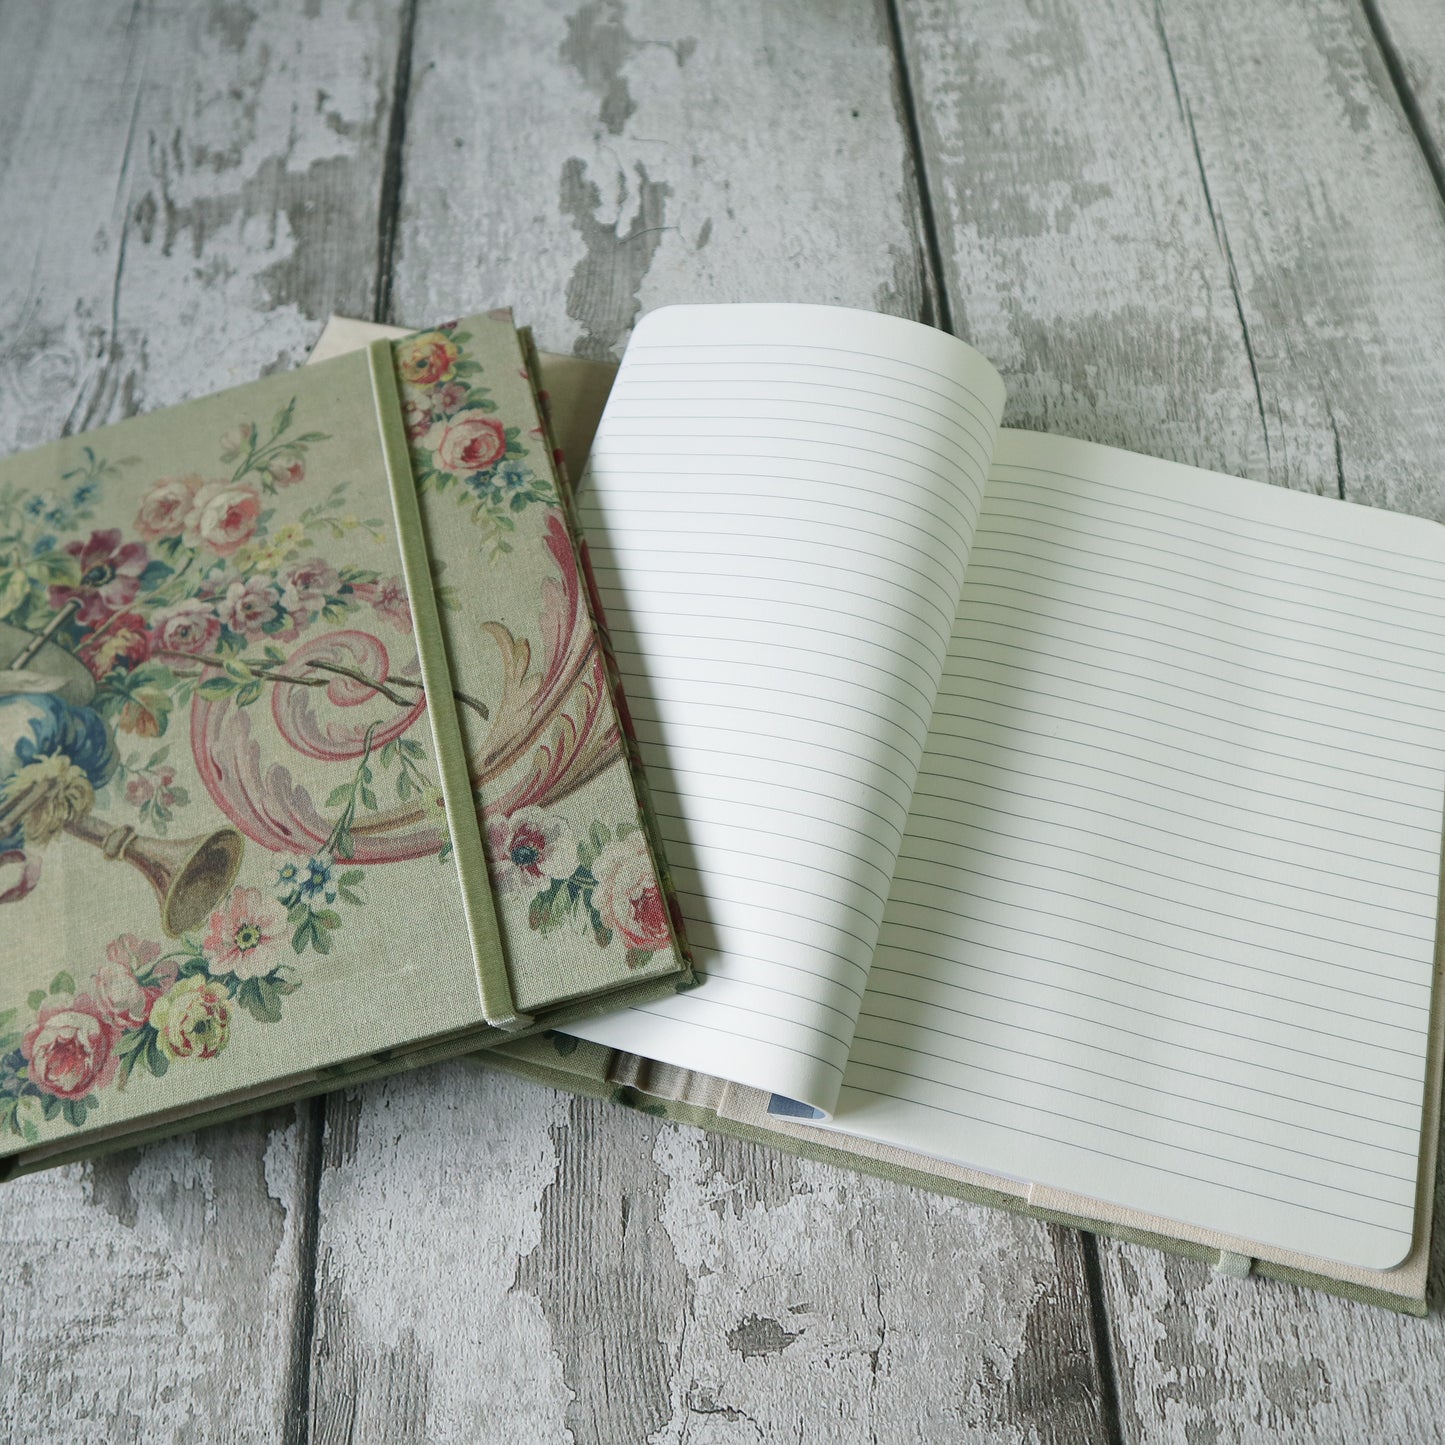 Re-usable Fabric Covered Note/Sketch Books